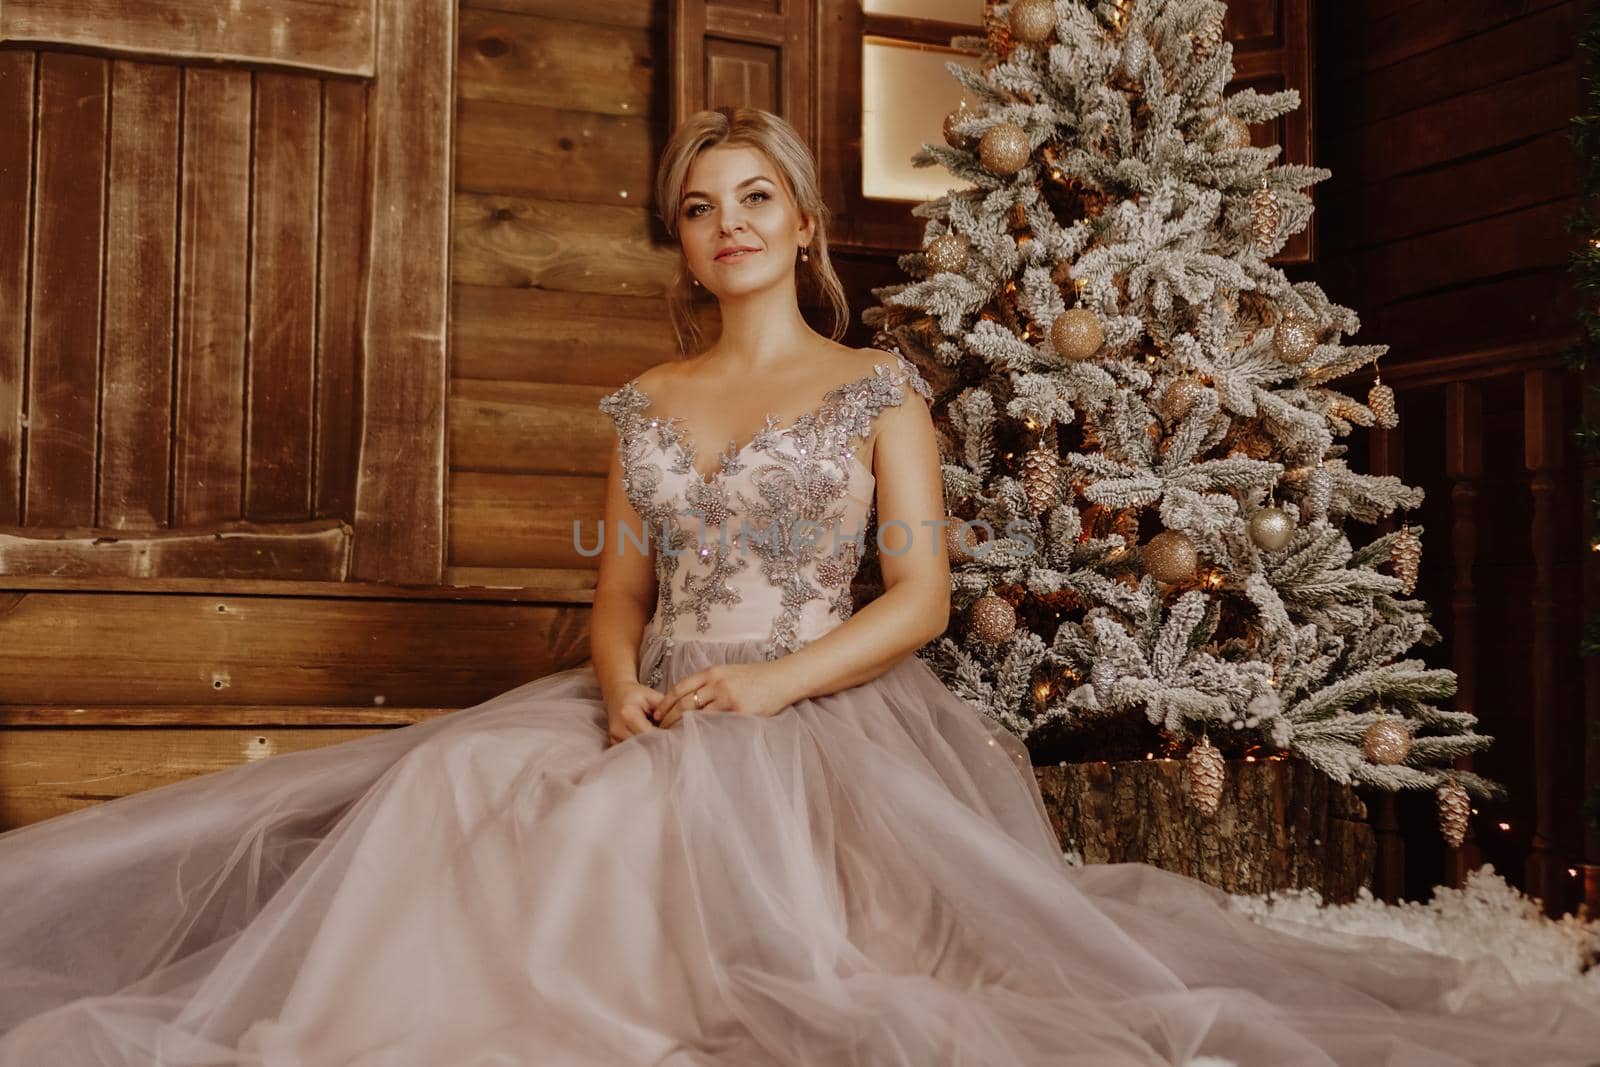 Christmas, winter holidays concept. Beautiful woman in evening long dress by natali_brill